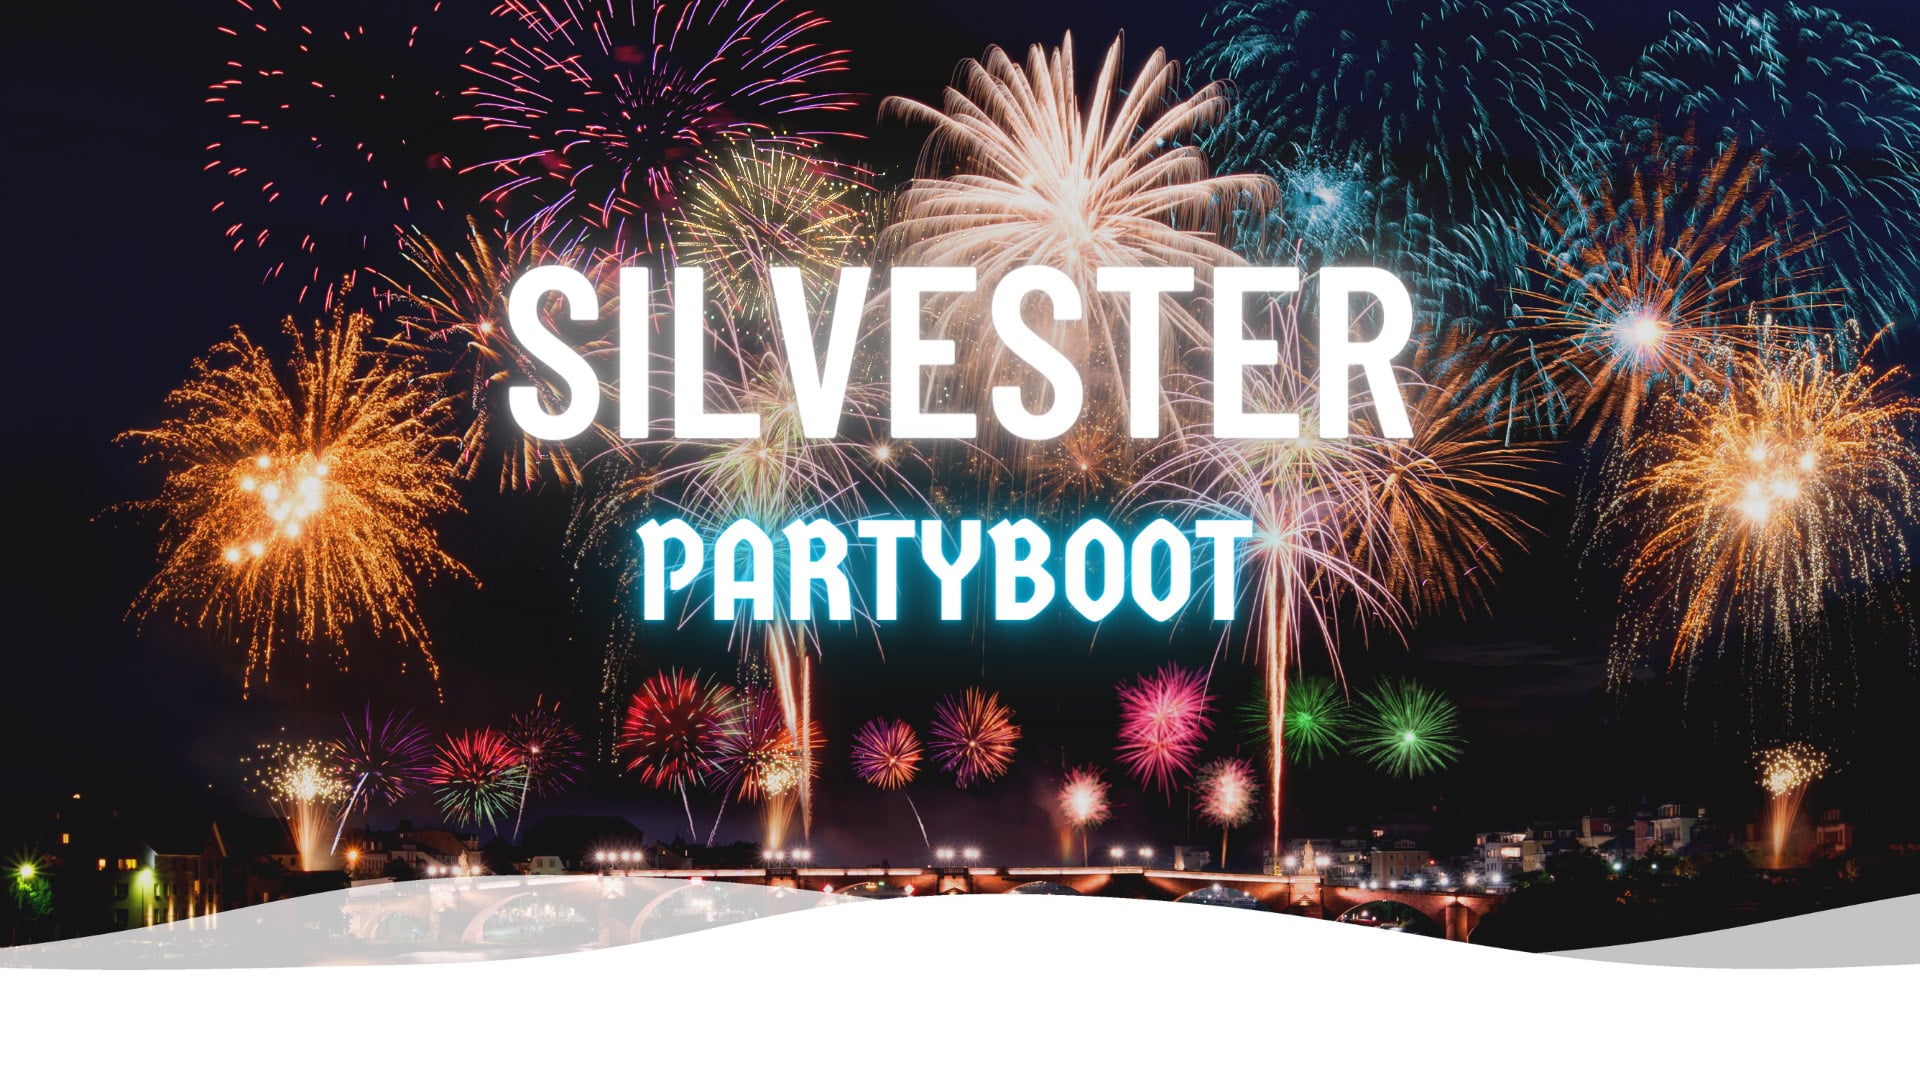 Silvester Partyboot